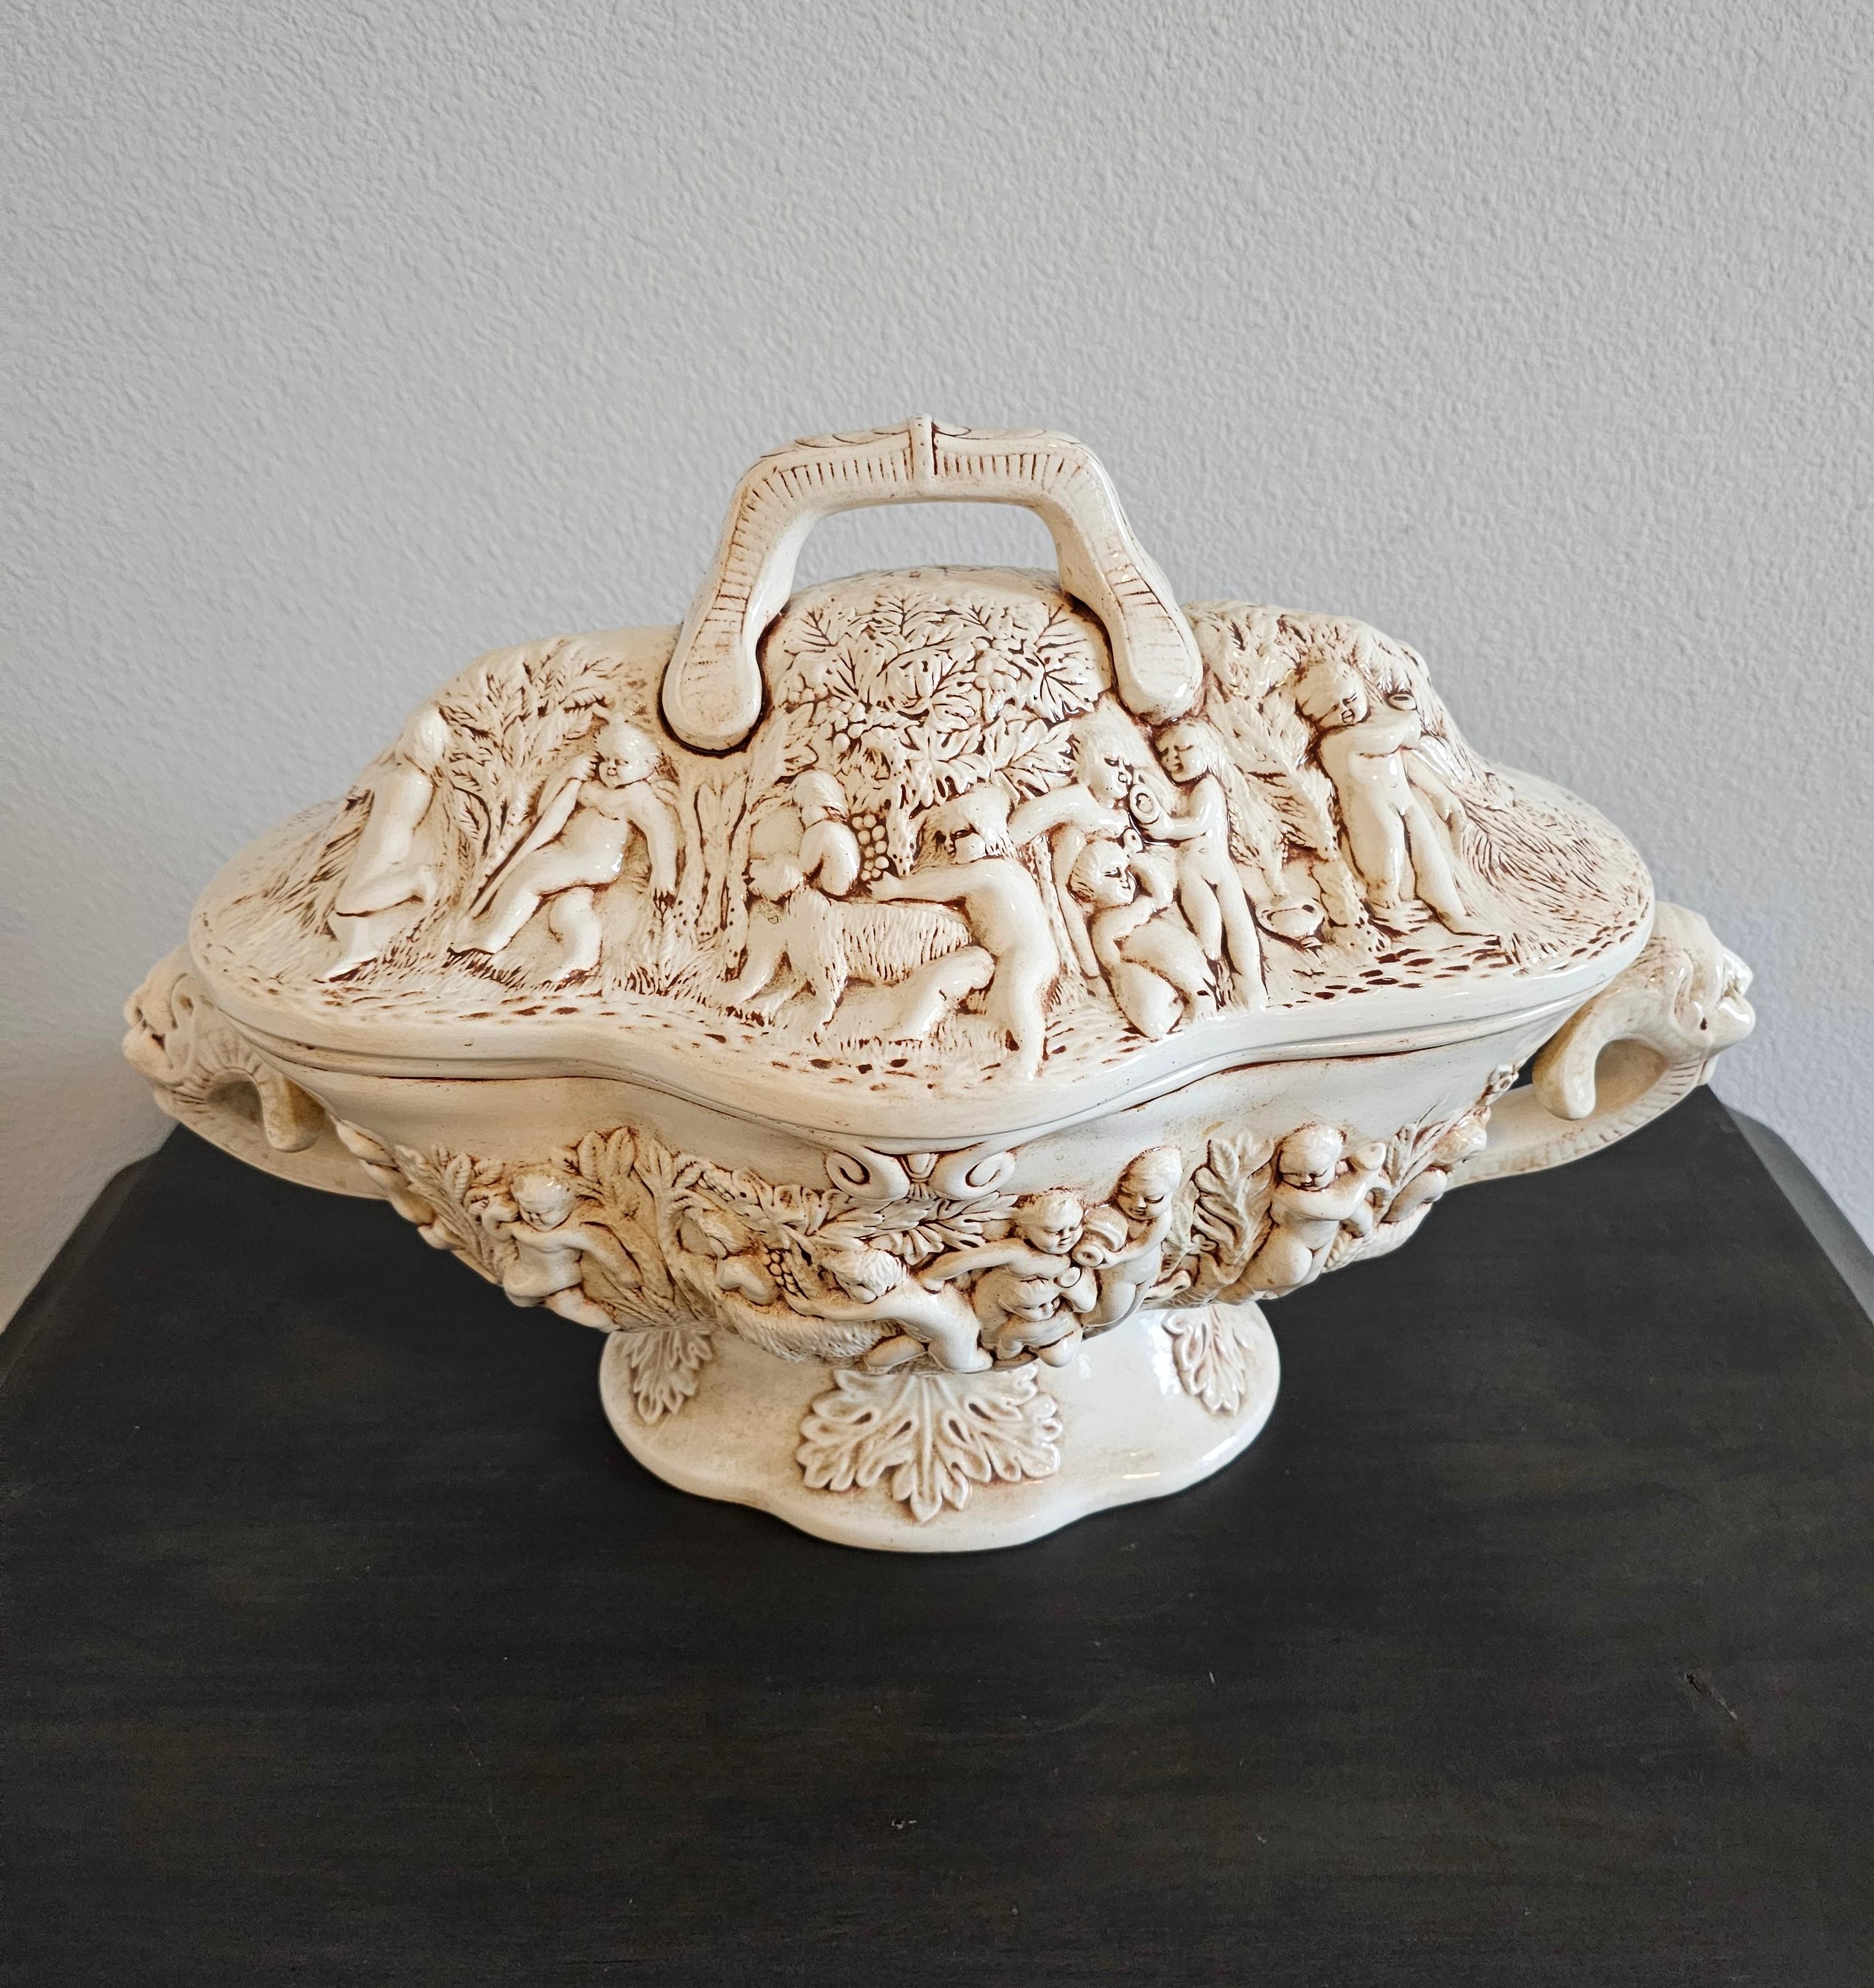 20th Century Vintage Italian Capodimonte Porcelain Covered Serving Dish Large Soup Tureen For Sale